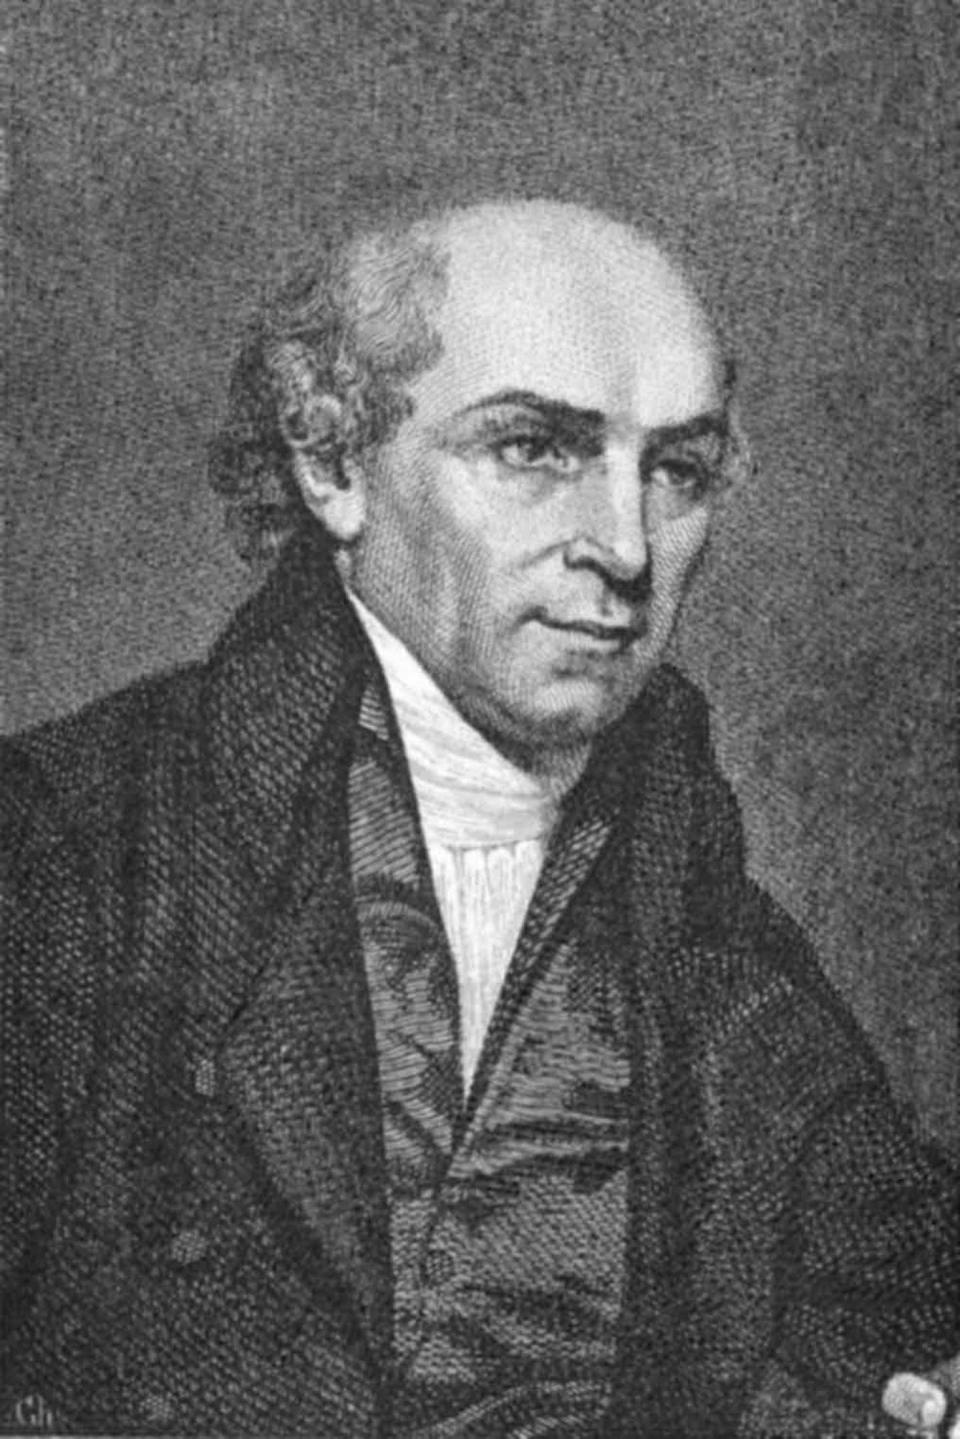 An engraving of shoemaker turn missionary William Carey